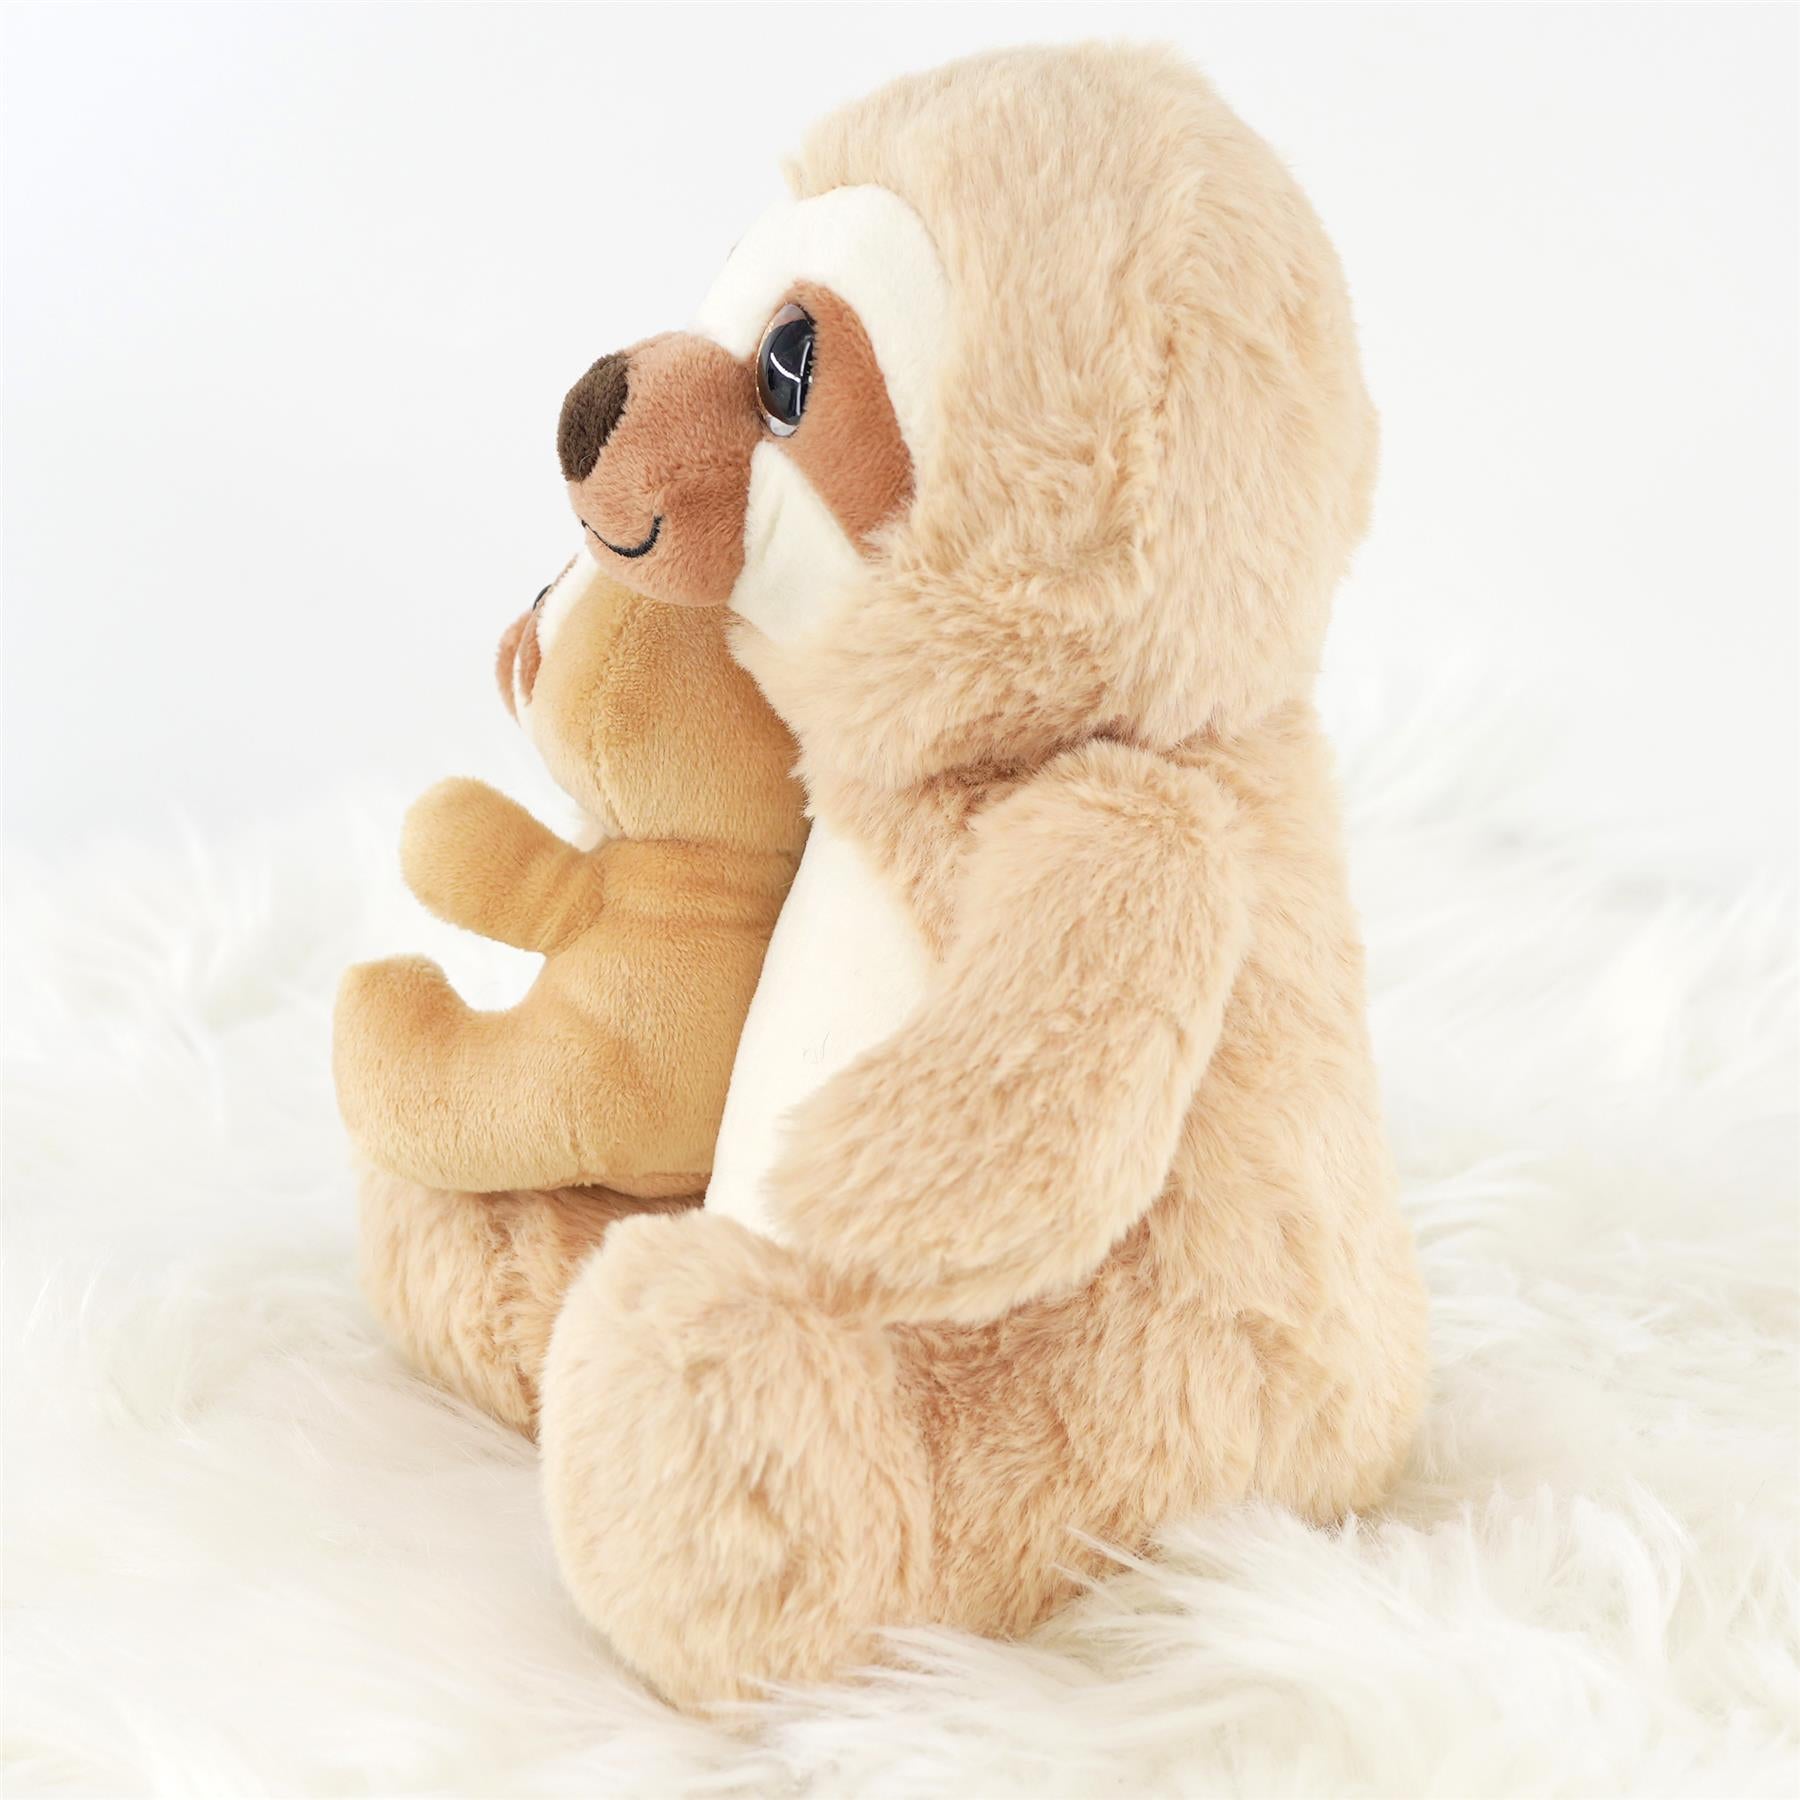 Mum and Baby Sloth Plush Toys by The Magic Toy Shop - The Magic Toy Shop